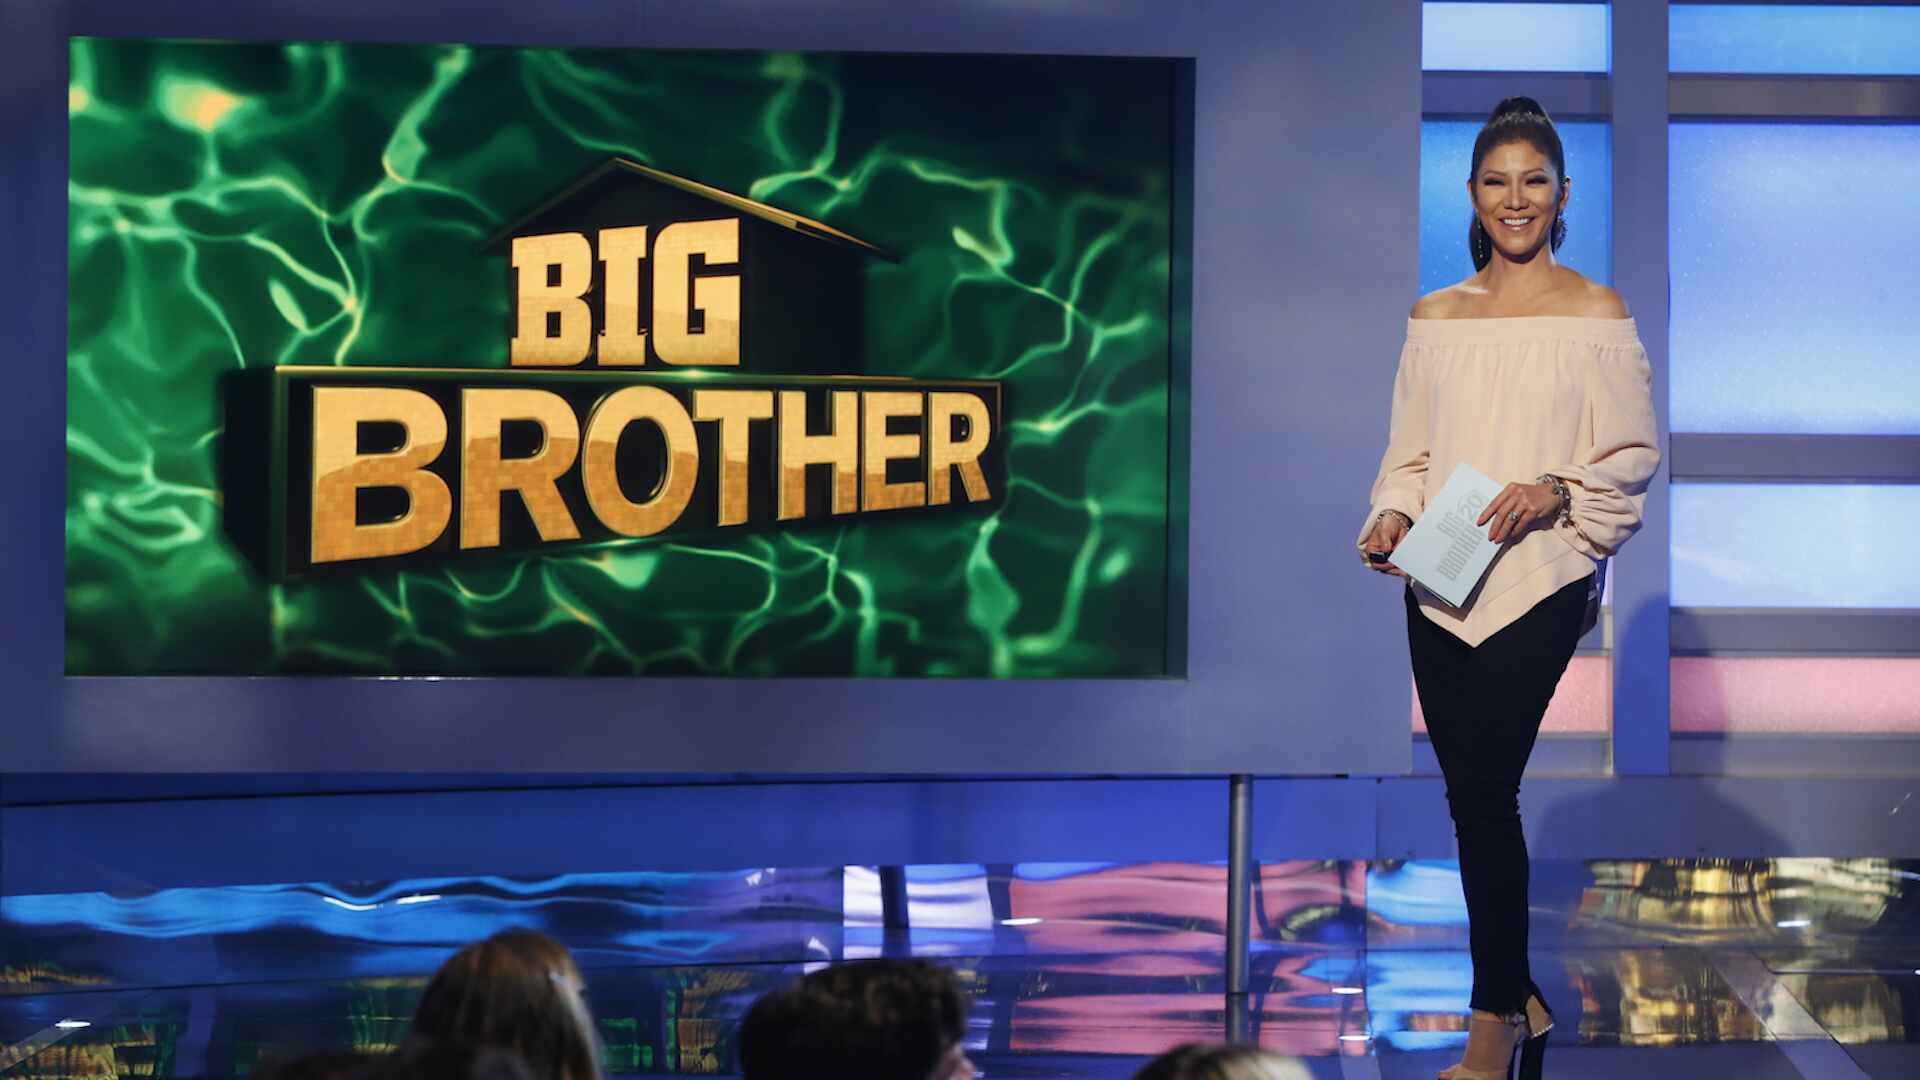 Big Brother Season 21 might have Julie Chen as host again